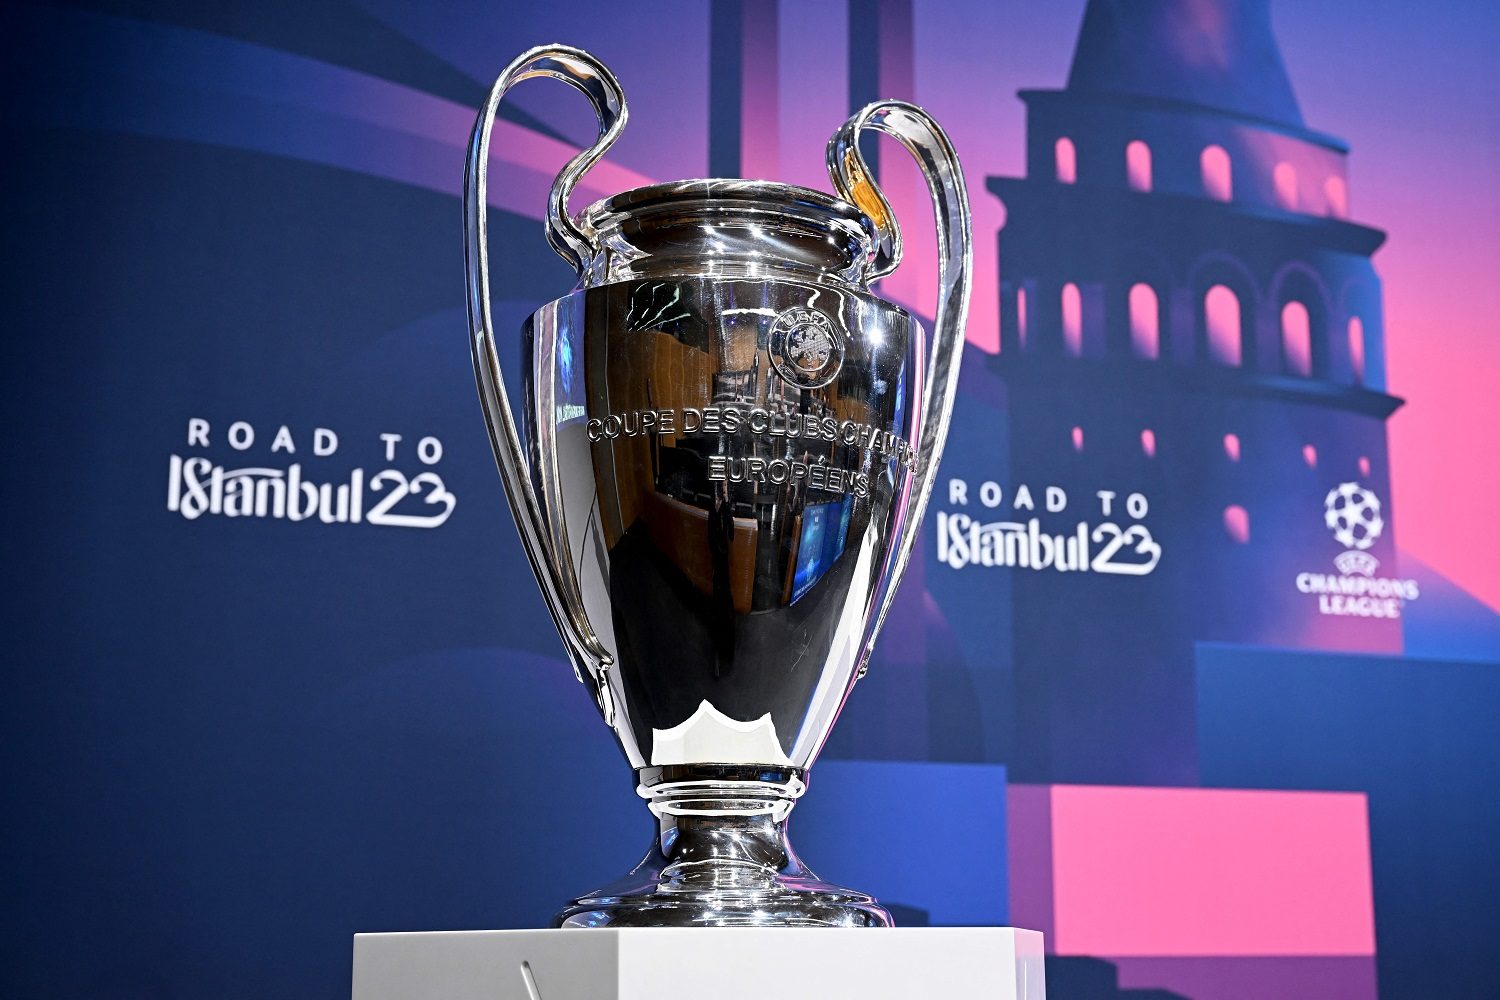 Champions League Road to Istanbul